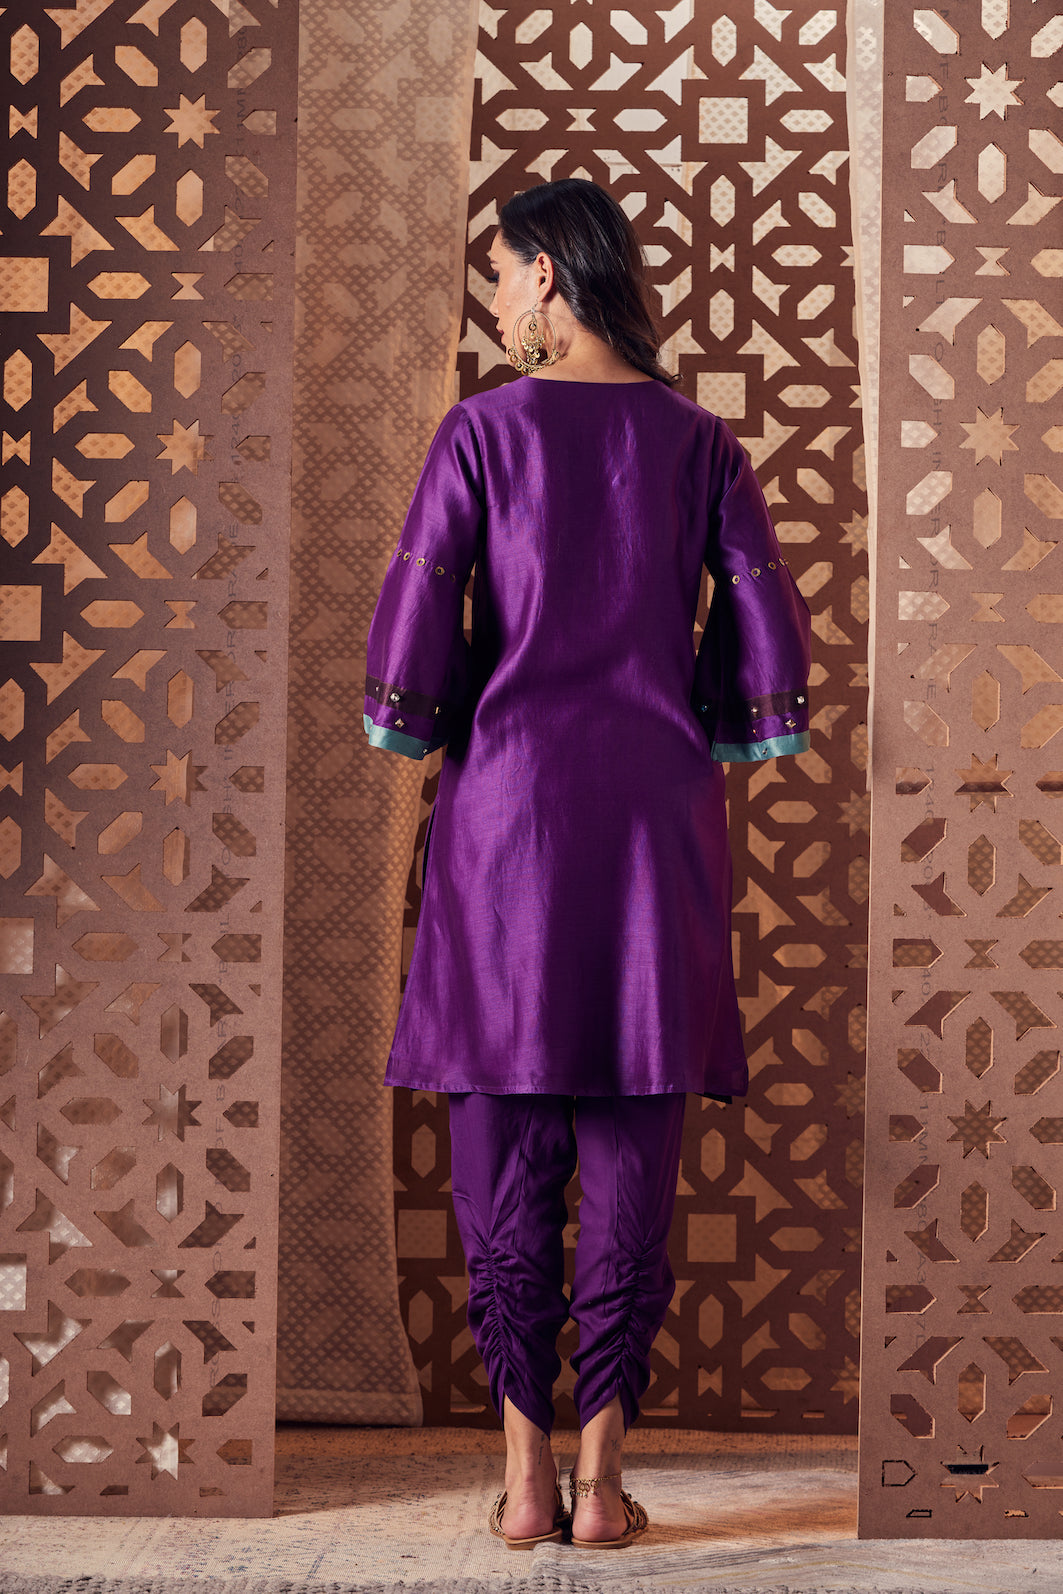 Purple Chanderi Bell Sleeve Kurta with Salwar - Set of 3 at Kamakhyaa by Charkhee. This item is Chanderi, Cotton, Embroidered, Ethnic Wear, Indian Wear, Kurta Salwar Sets, Kurta Set With Dupatta, Naayaab, Natural, Nayaab, Purple, Relaxed Fit, Womenswear